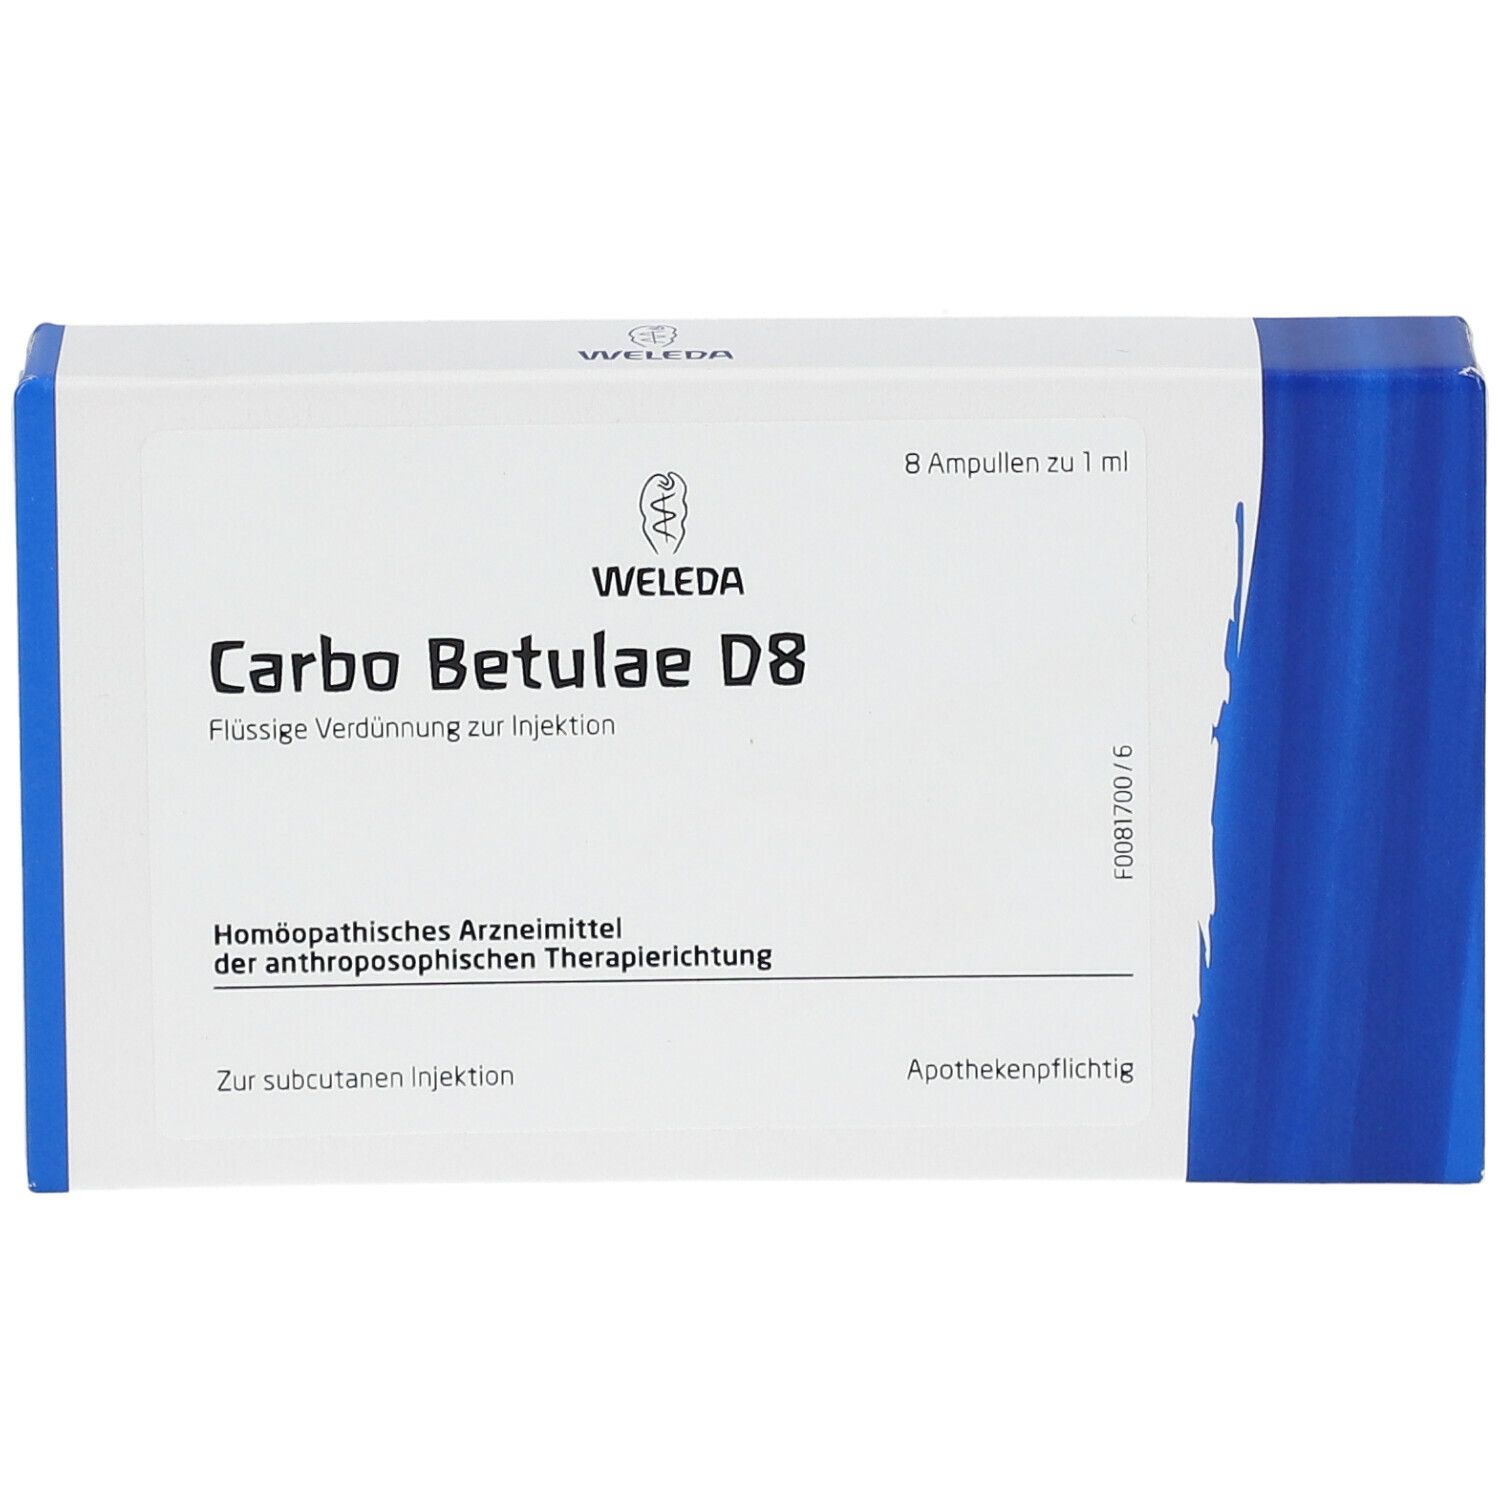 Carbo Betulae D8 Ampullen